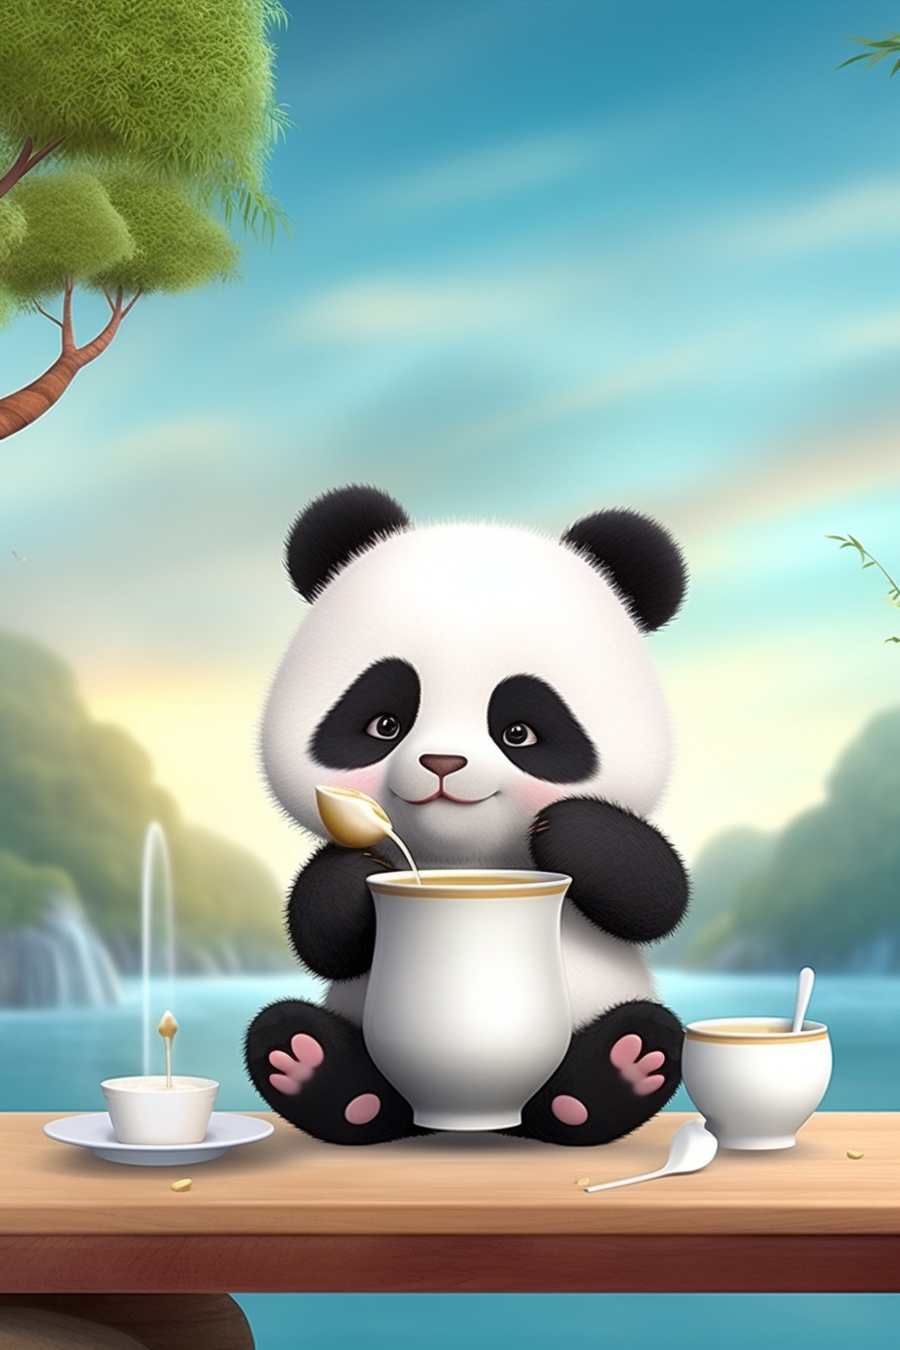 A panda bear is sitting on a table and drinking tea.